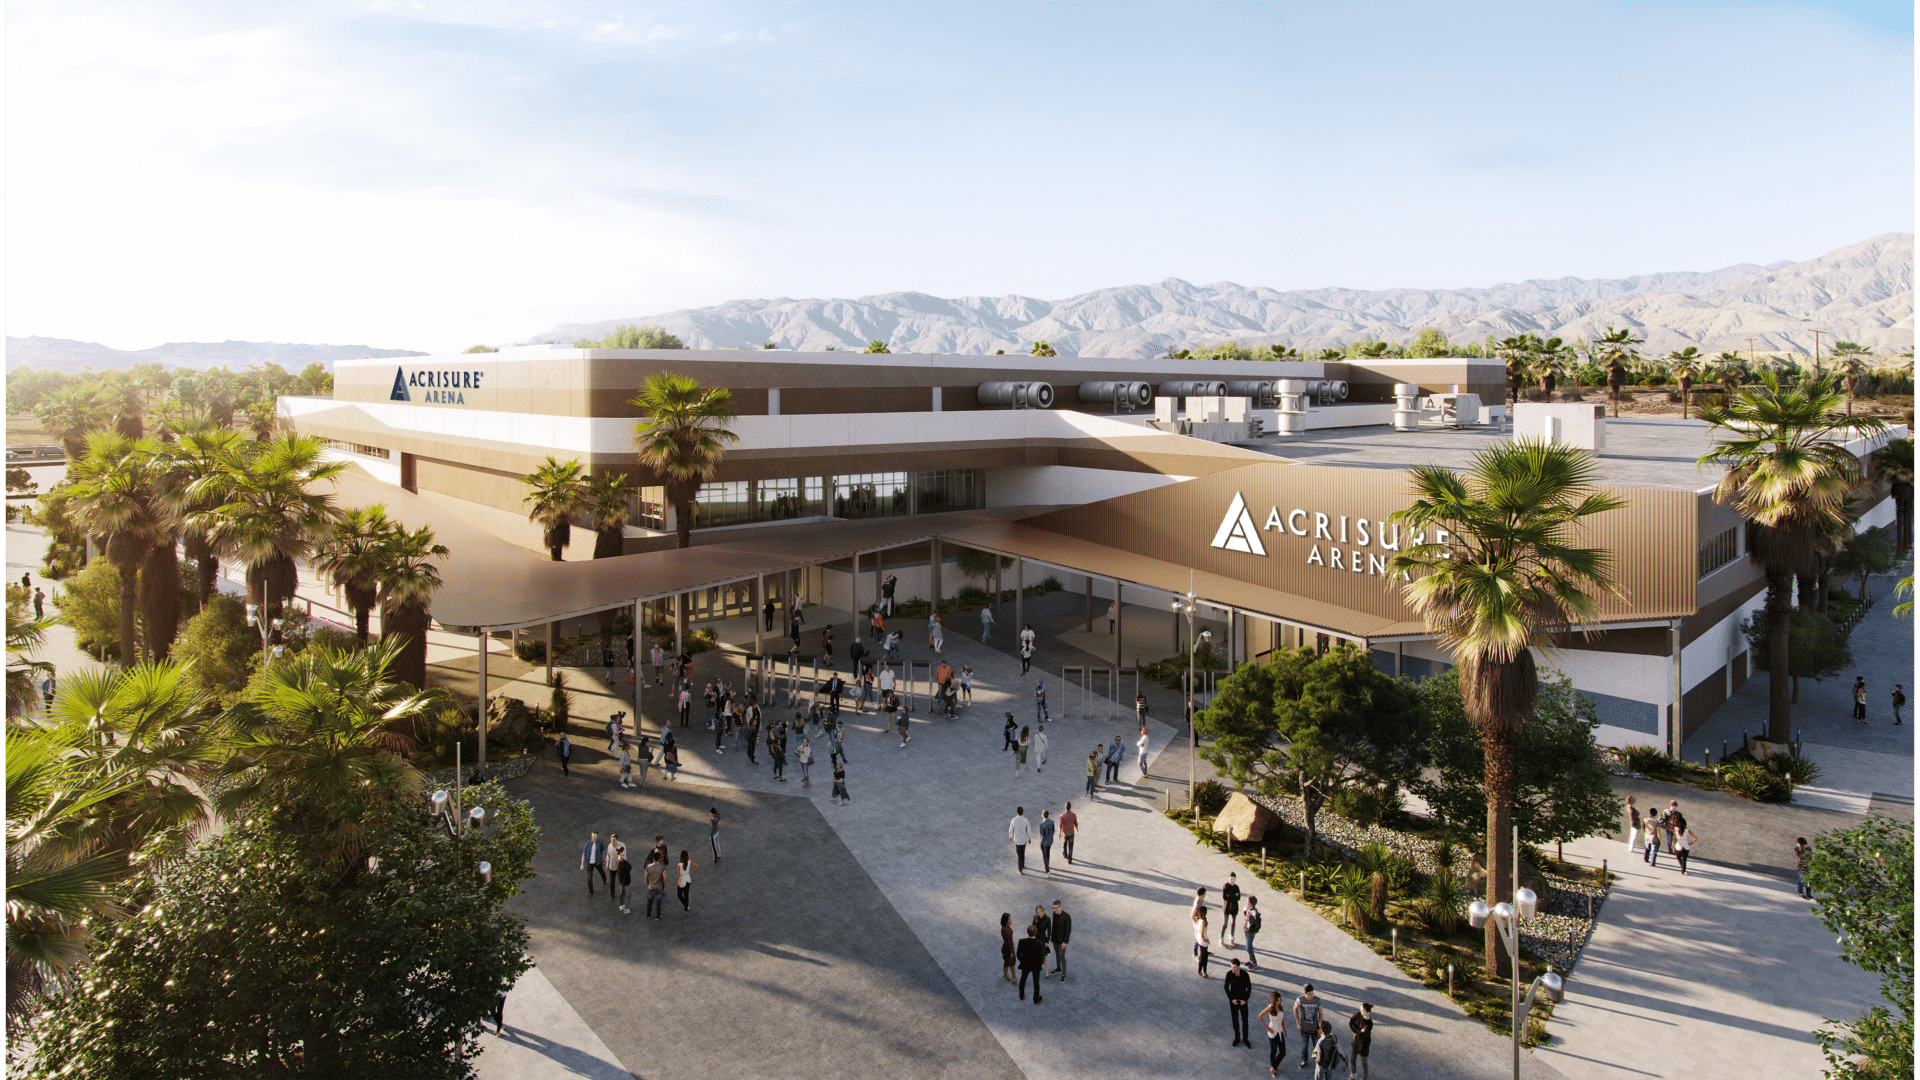 Acrisure puts name on Palm Springs arena VenuesNow